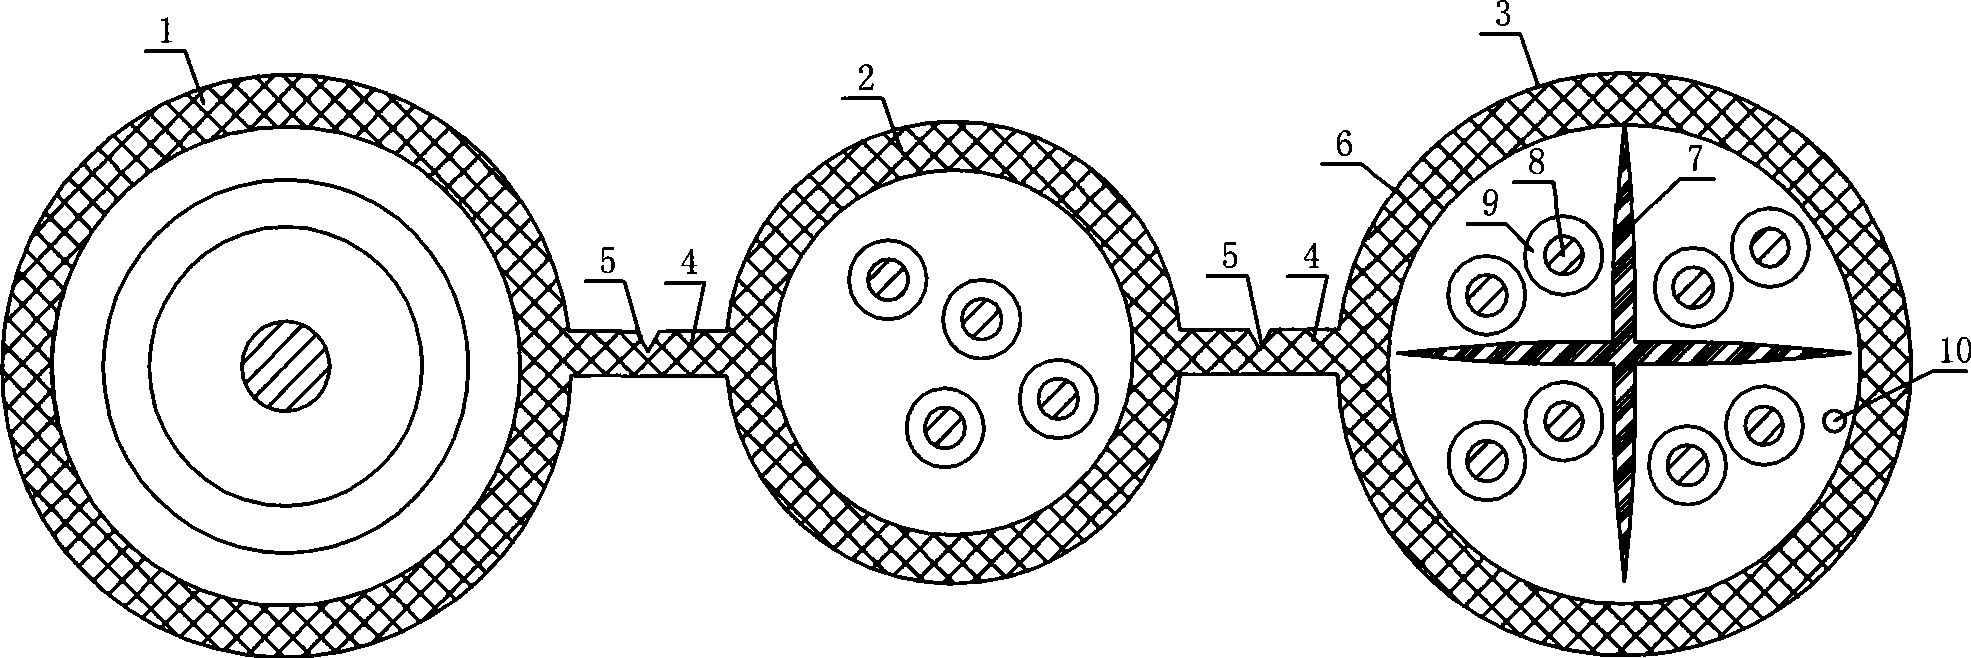 Three-assembling combination cable